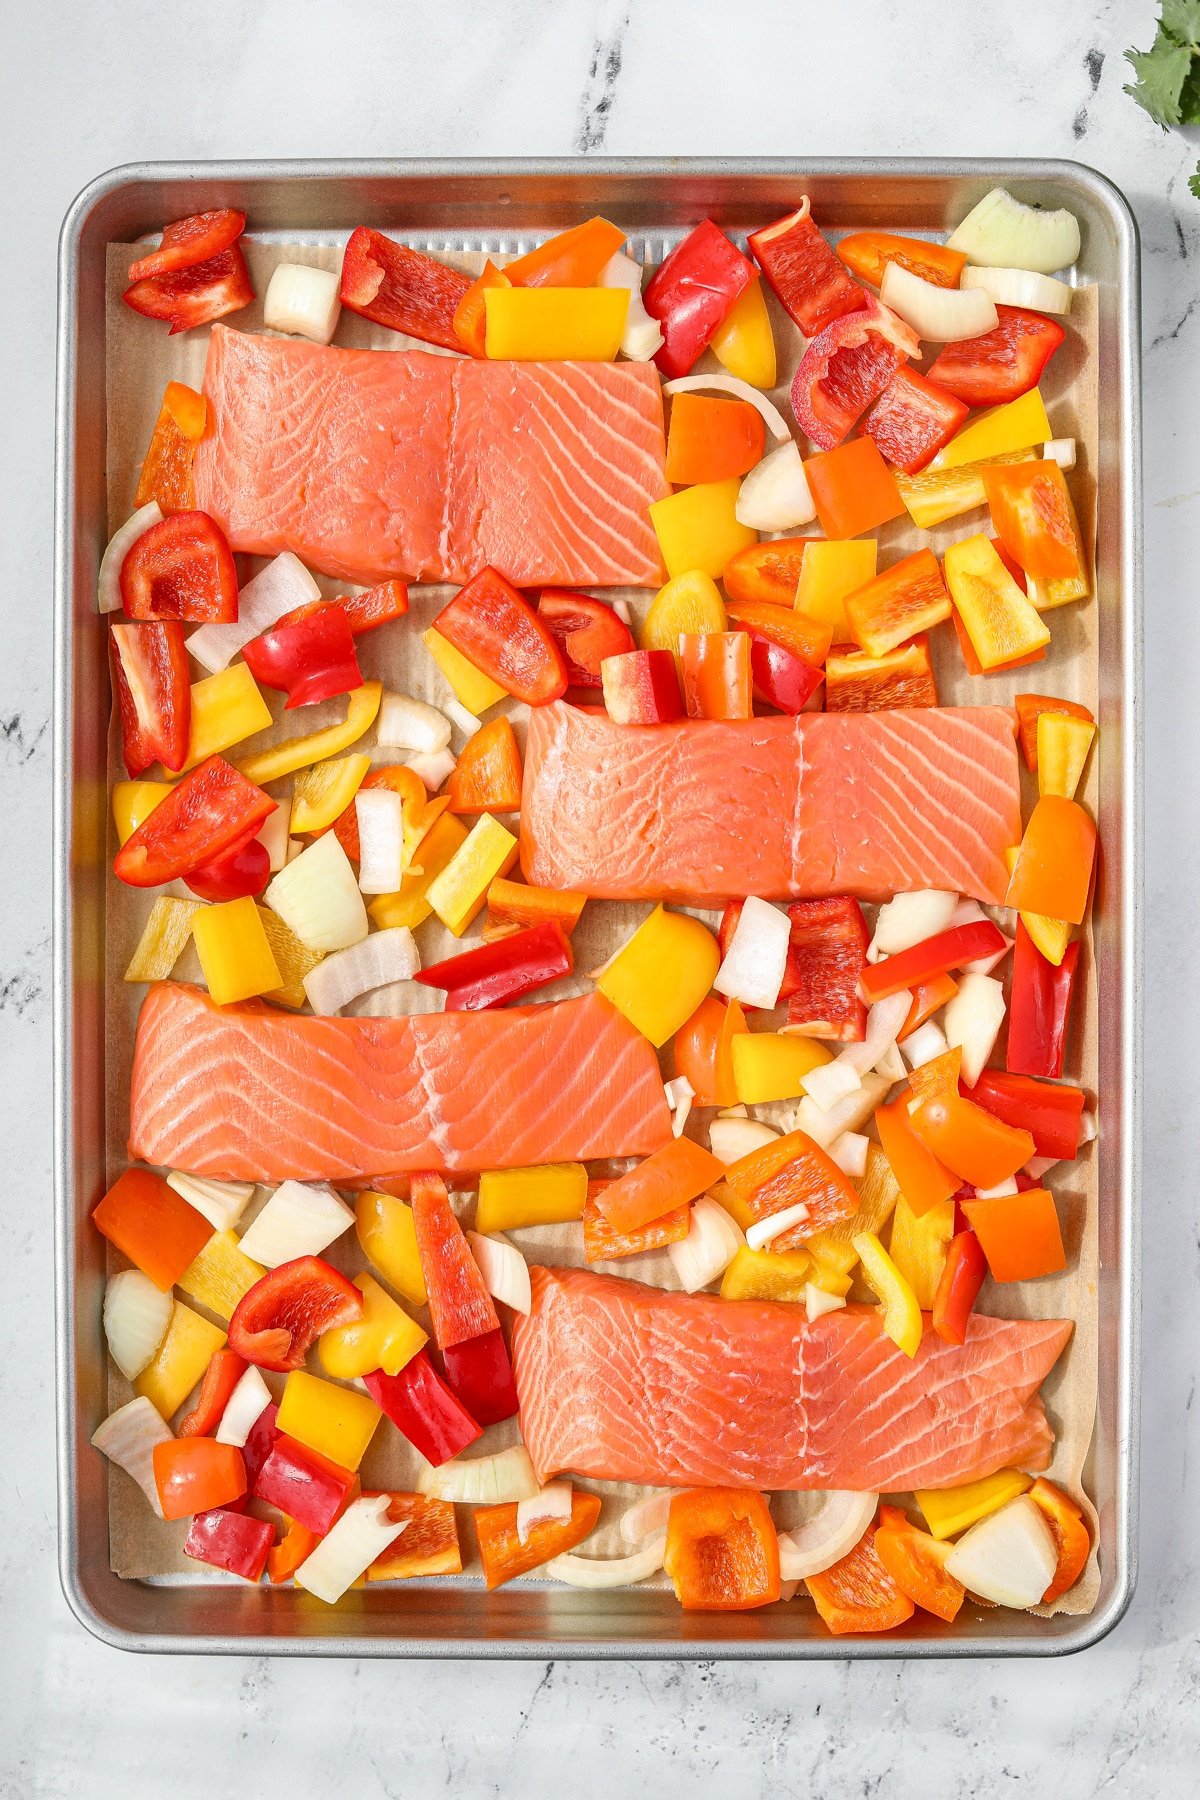 A sheet pan with salmon and veggies on it.